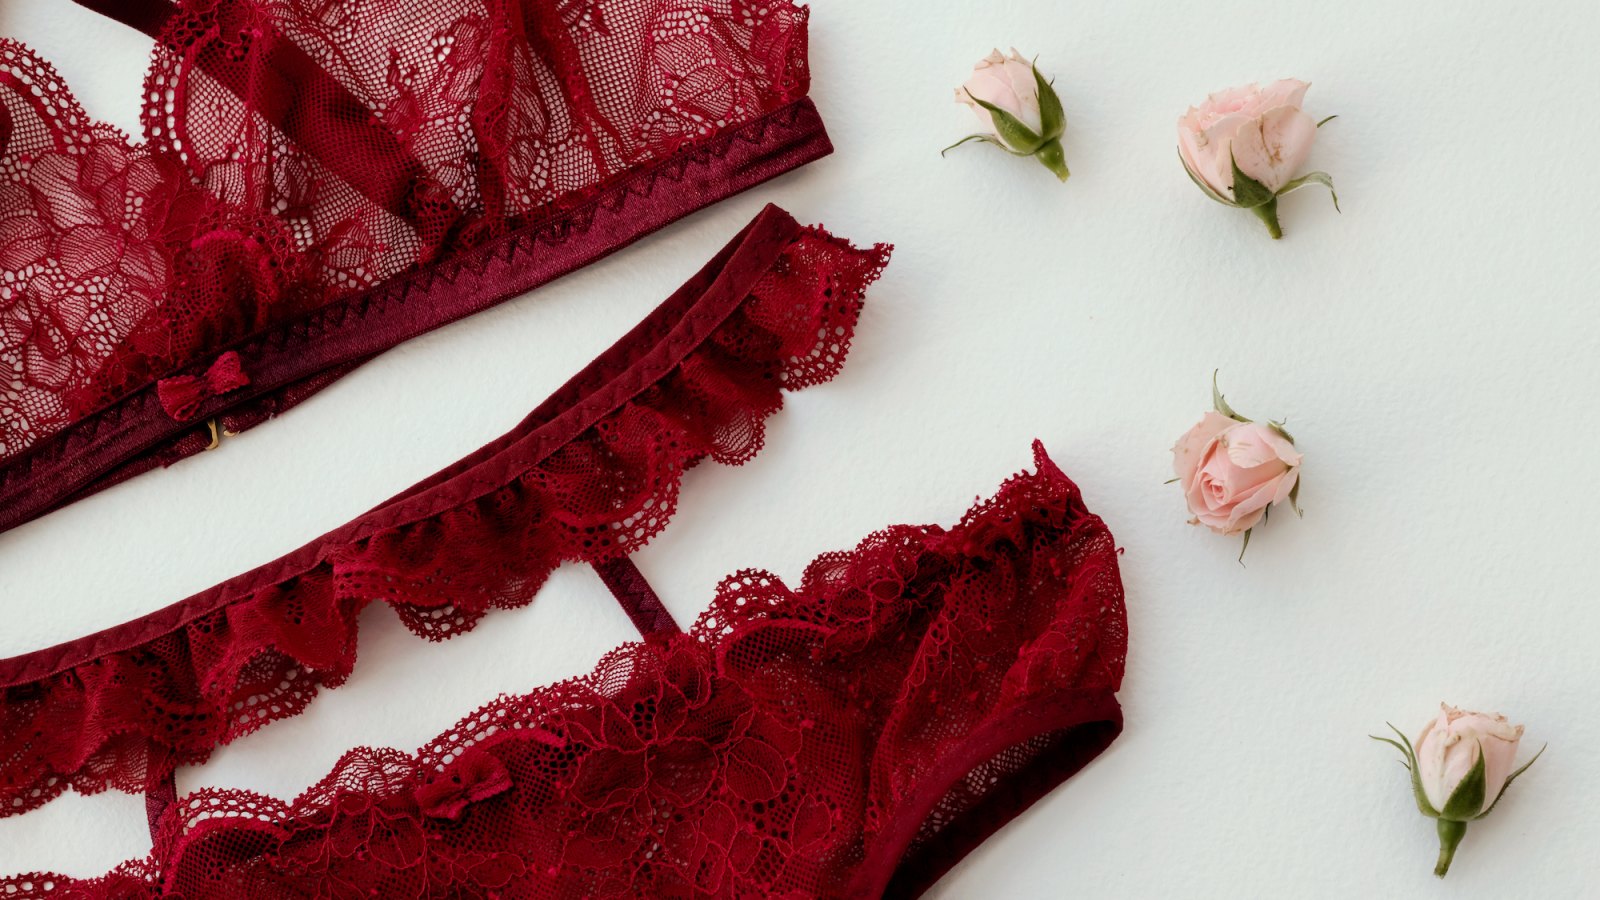 Lace Lingerie Designed for EVERY Body